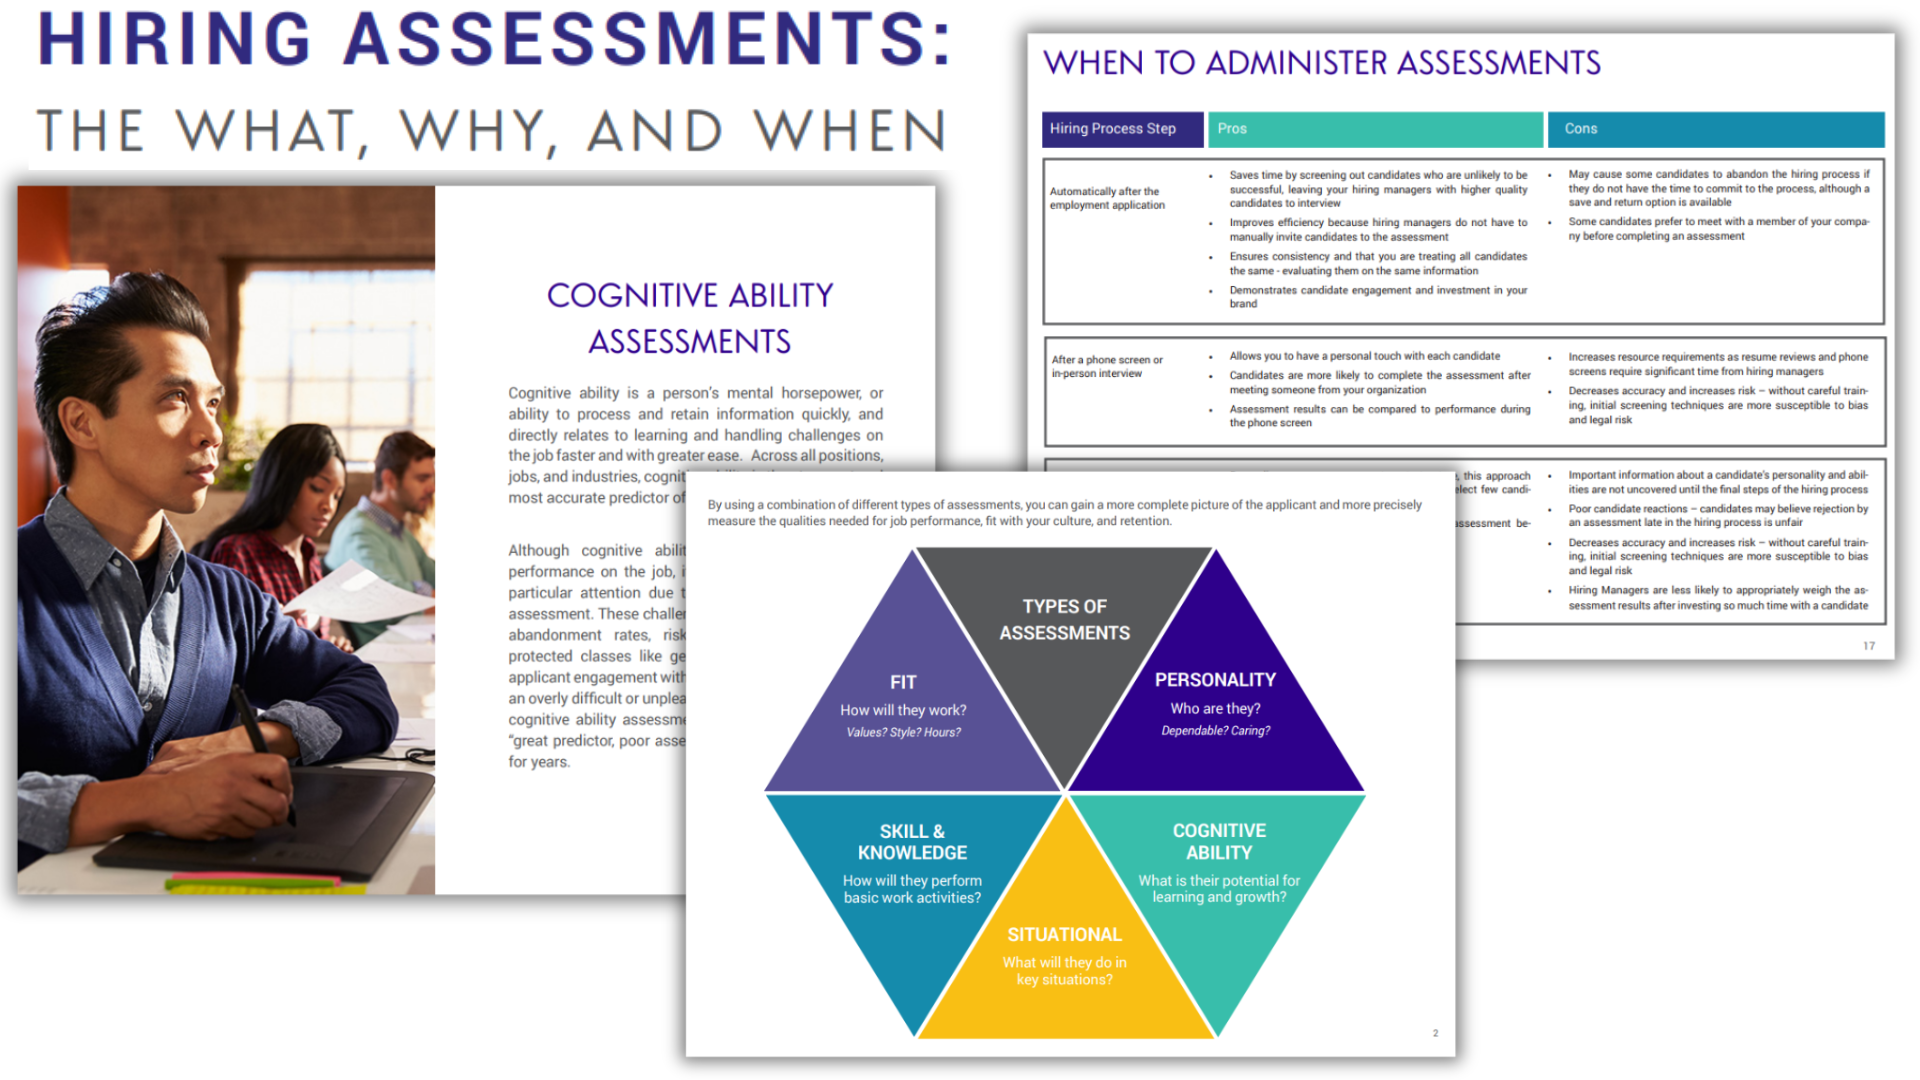 eBook Hiring Assessments what, why, and when Images